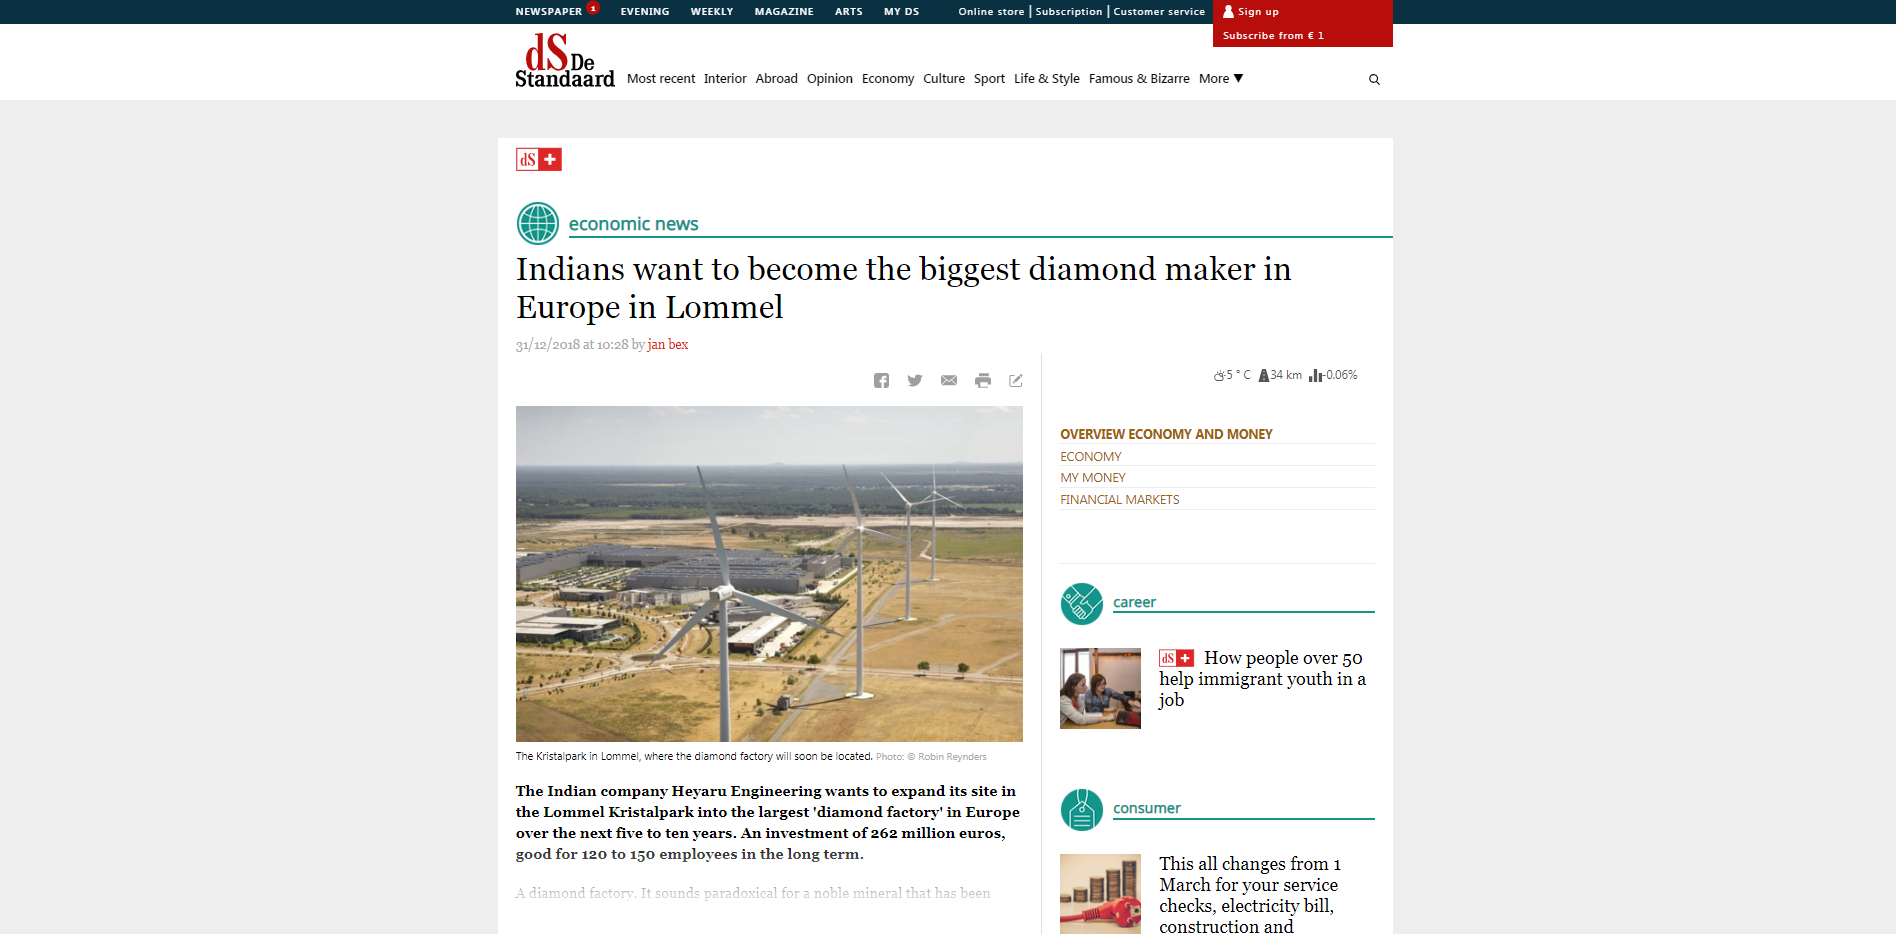 Indians want to become the biggest diamond maker in Europe in Lommel</p>
<p>